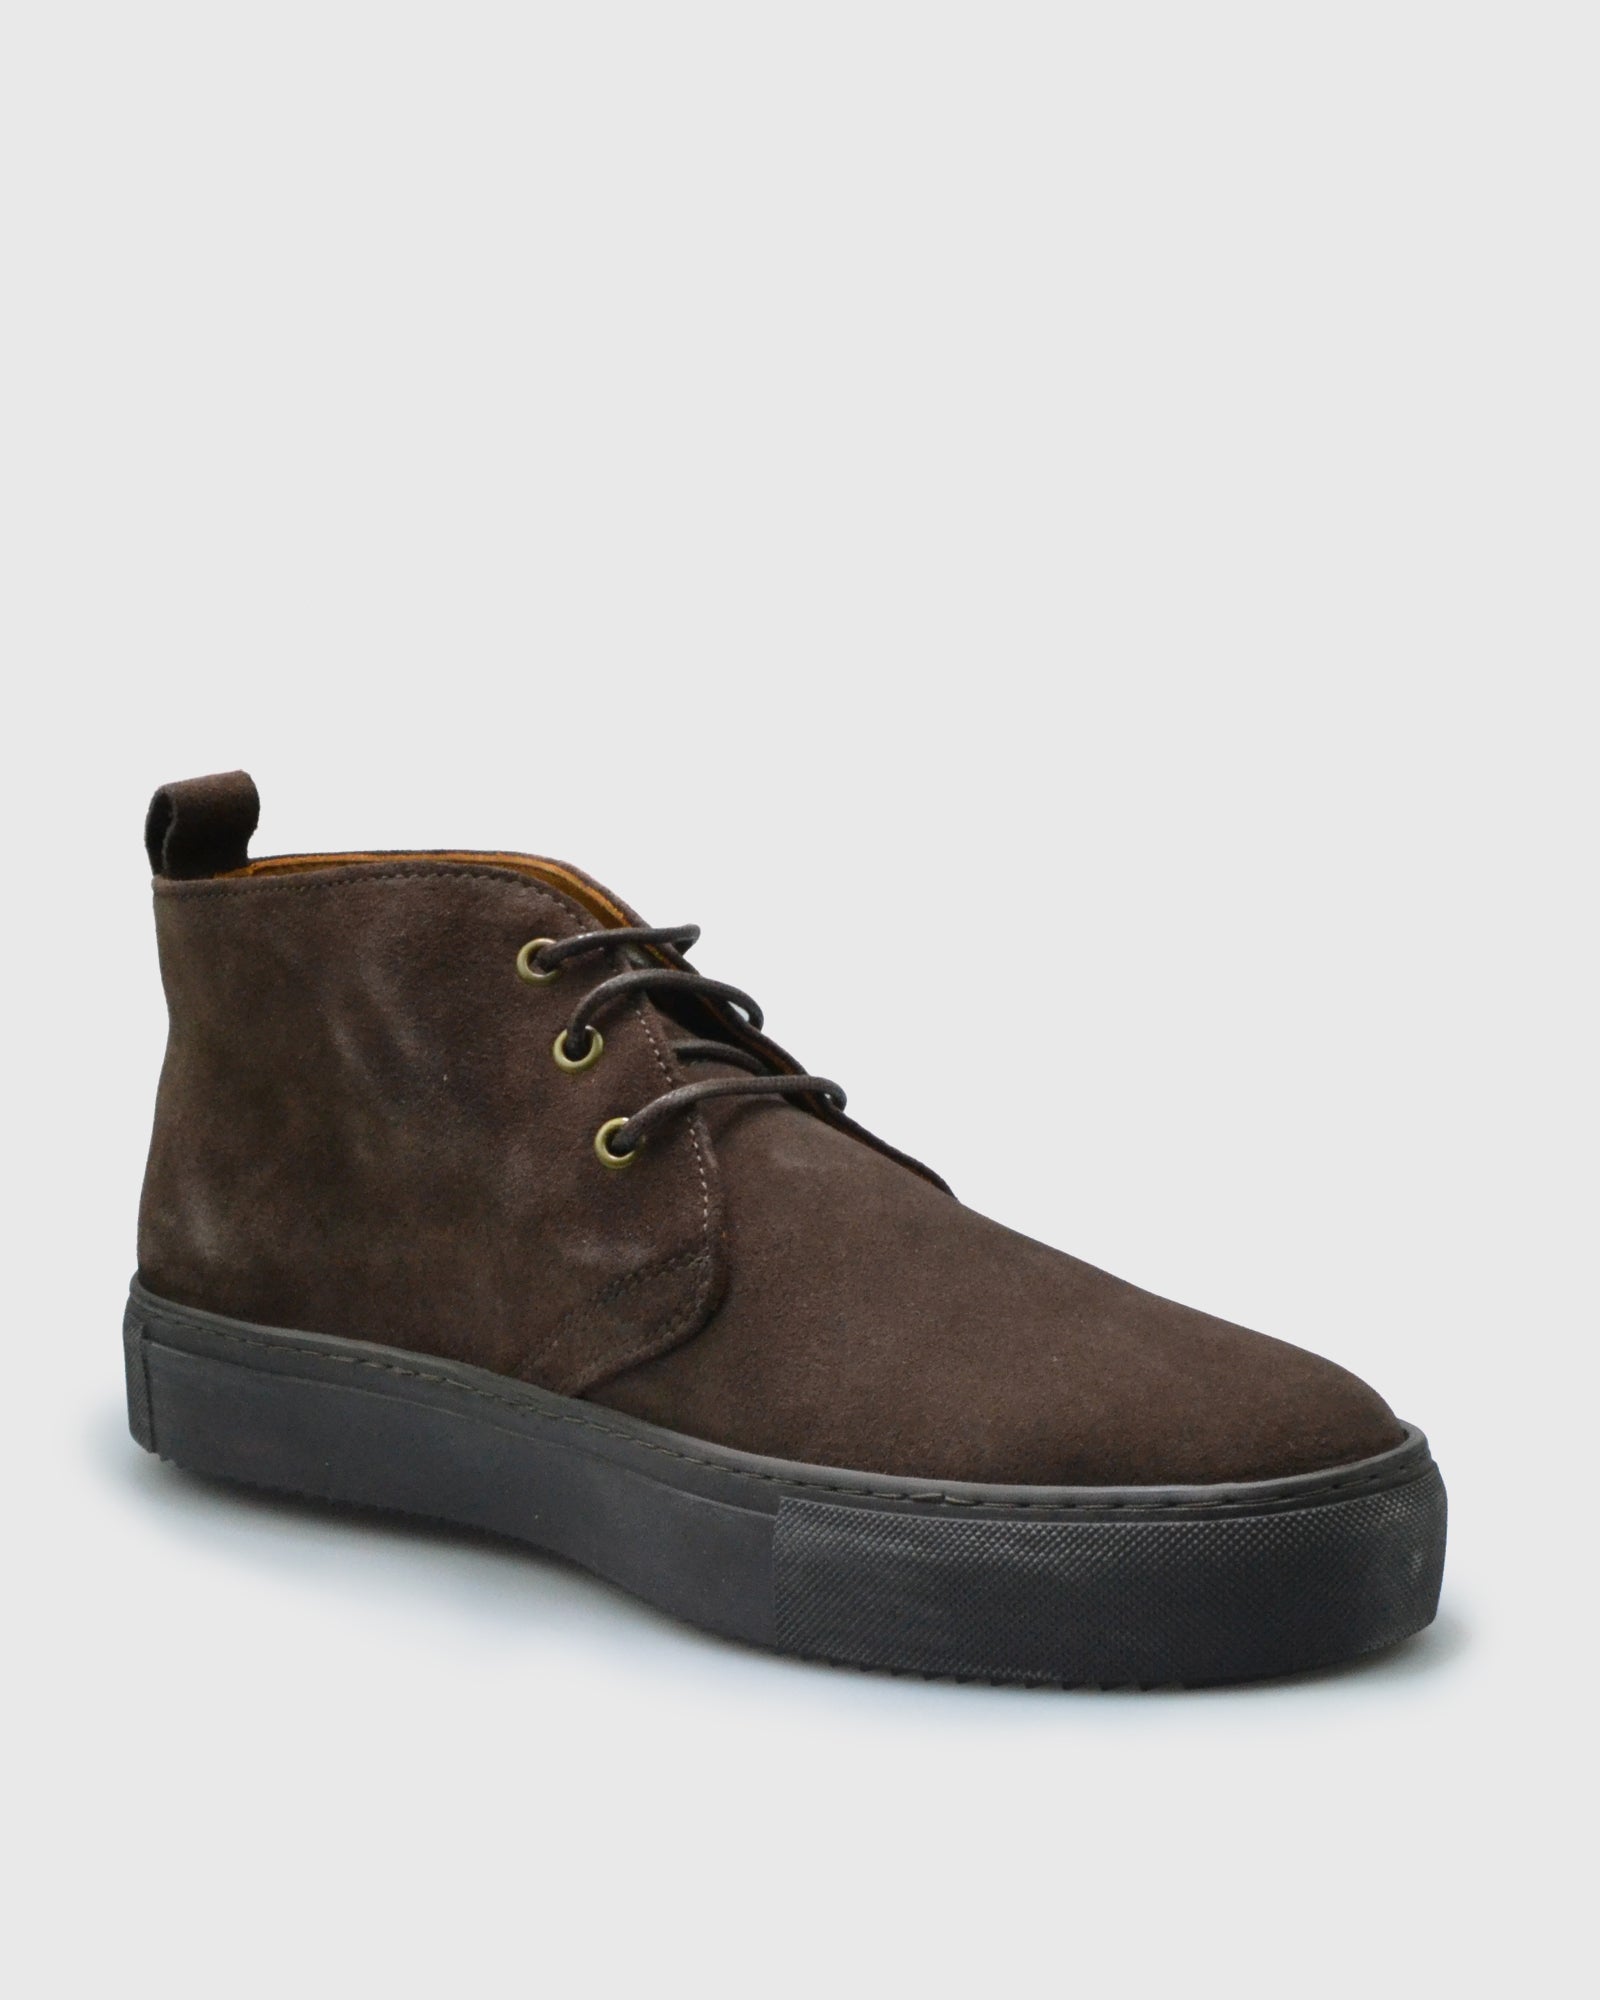 VINCENT & FRANKS VFW22 SUEDE CHOCOLATE HIGH-TOP BOOT